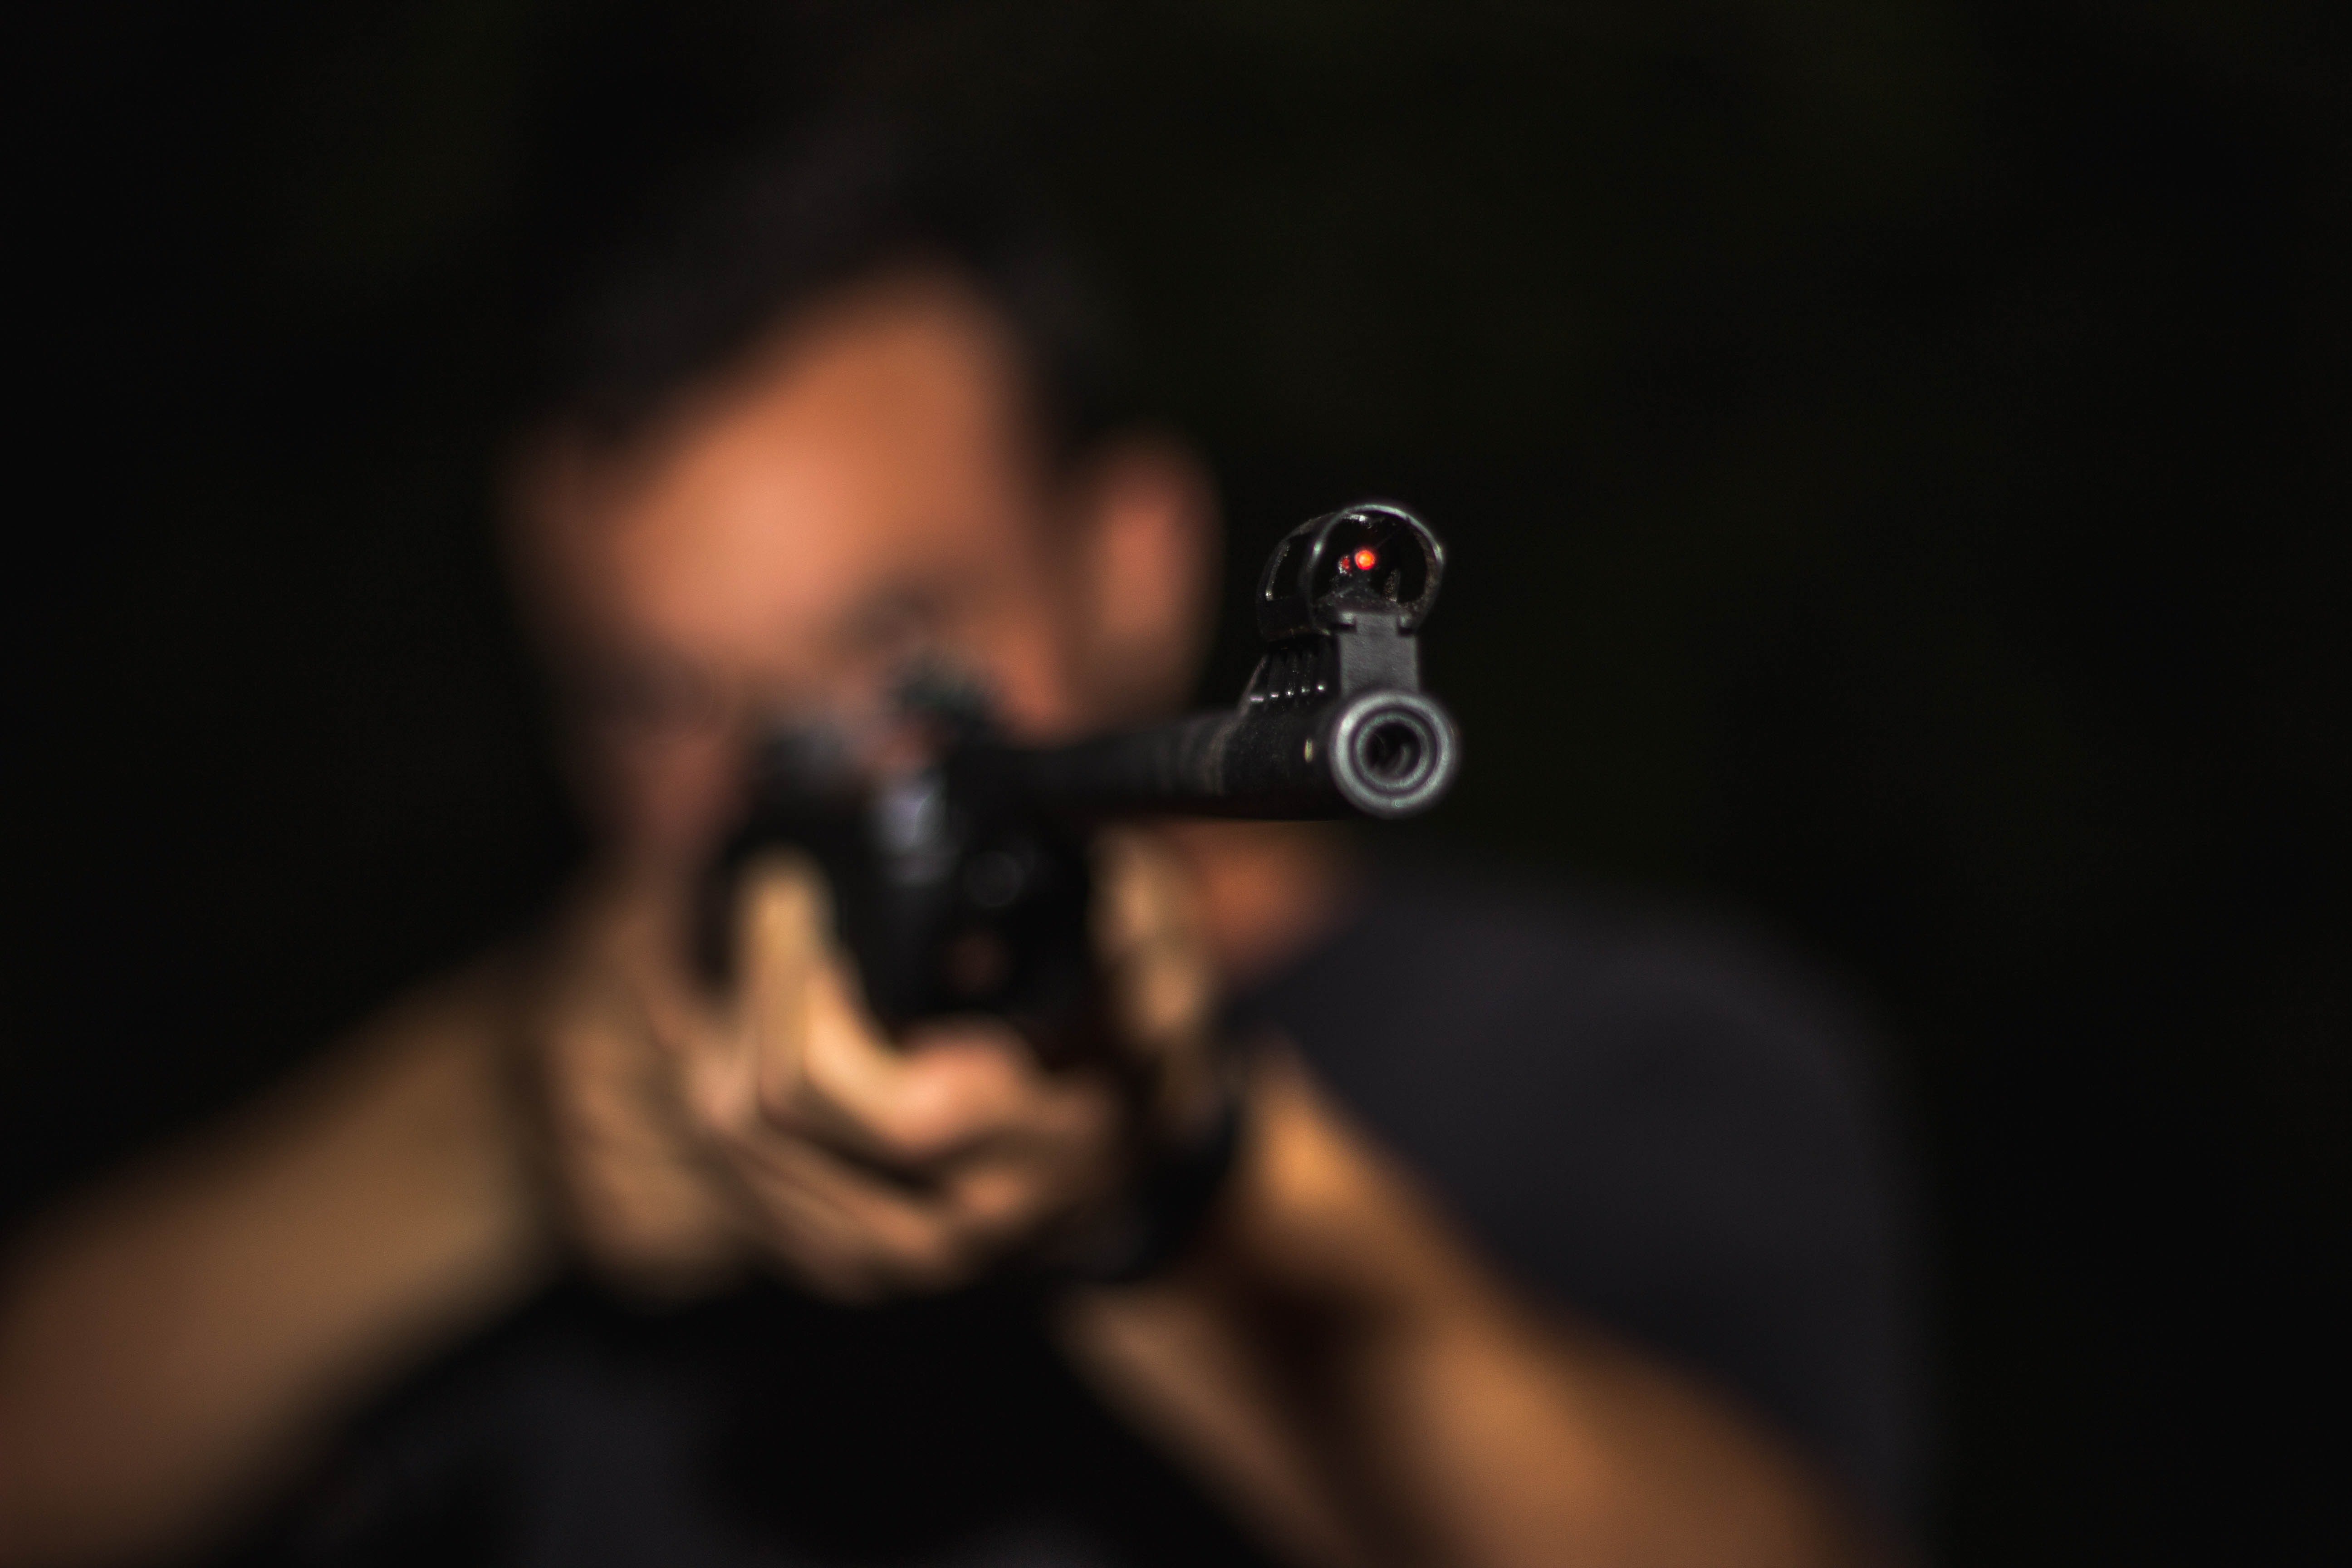 Pictured - A photo of a man holding a rifle and aiming | Source: Pexels 